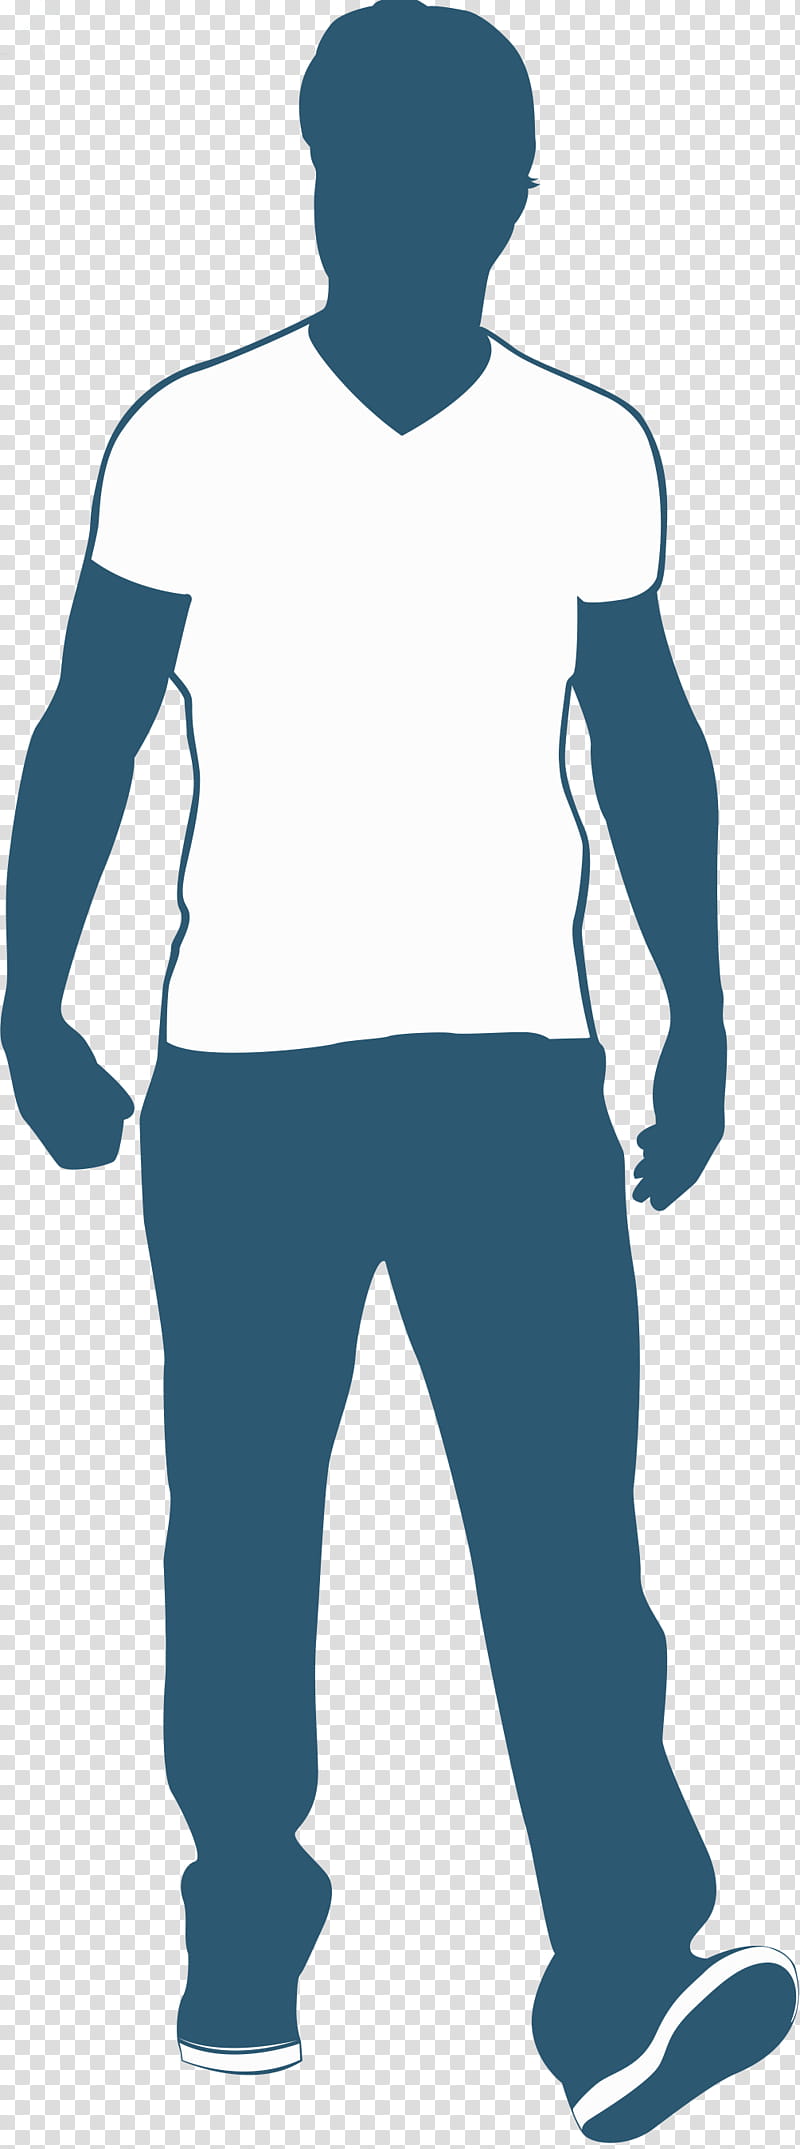 Jeans, Casual Wear, Smart Casual, Business Casual, Dress Code, Clothing, Tshirt, Suit transparent background PNG clipart